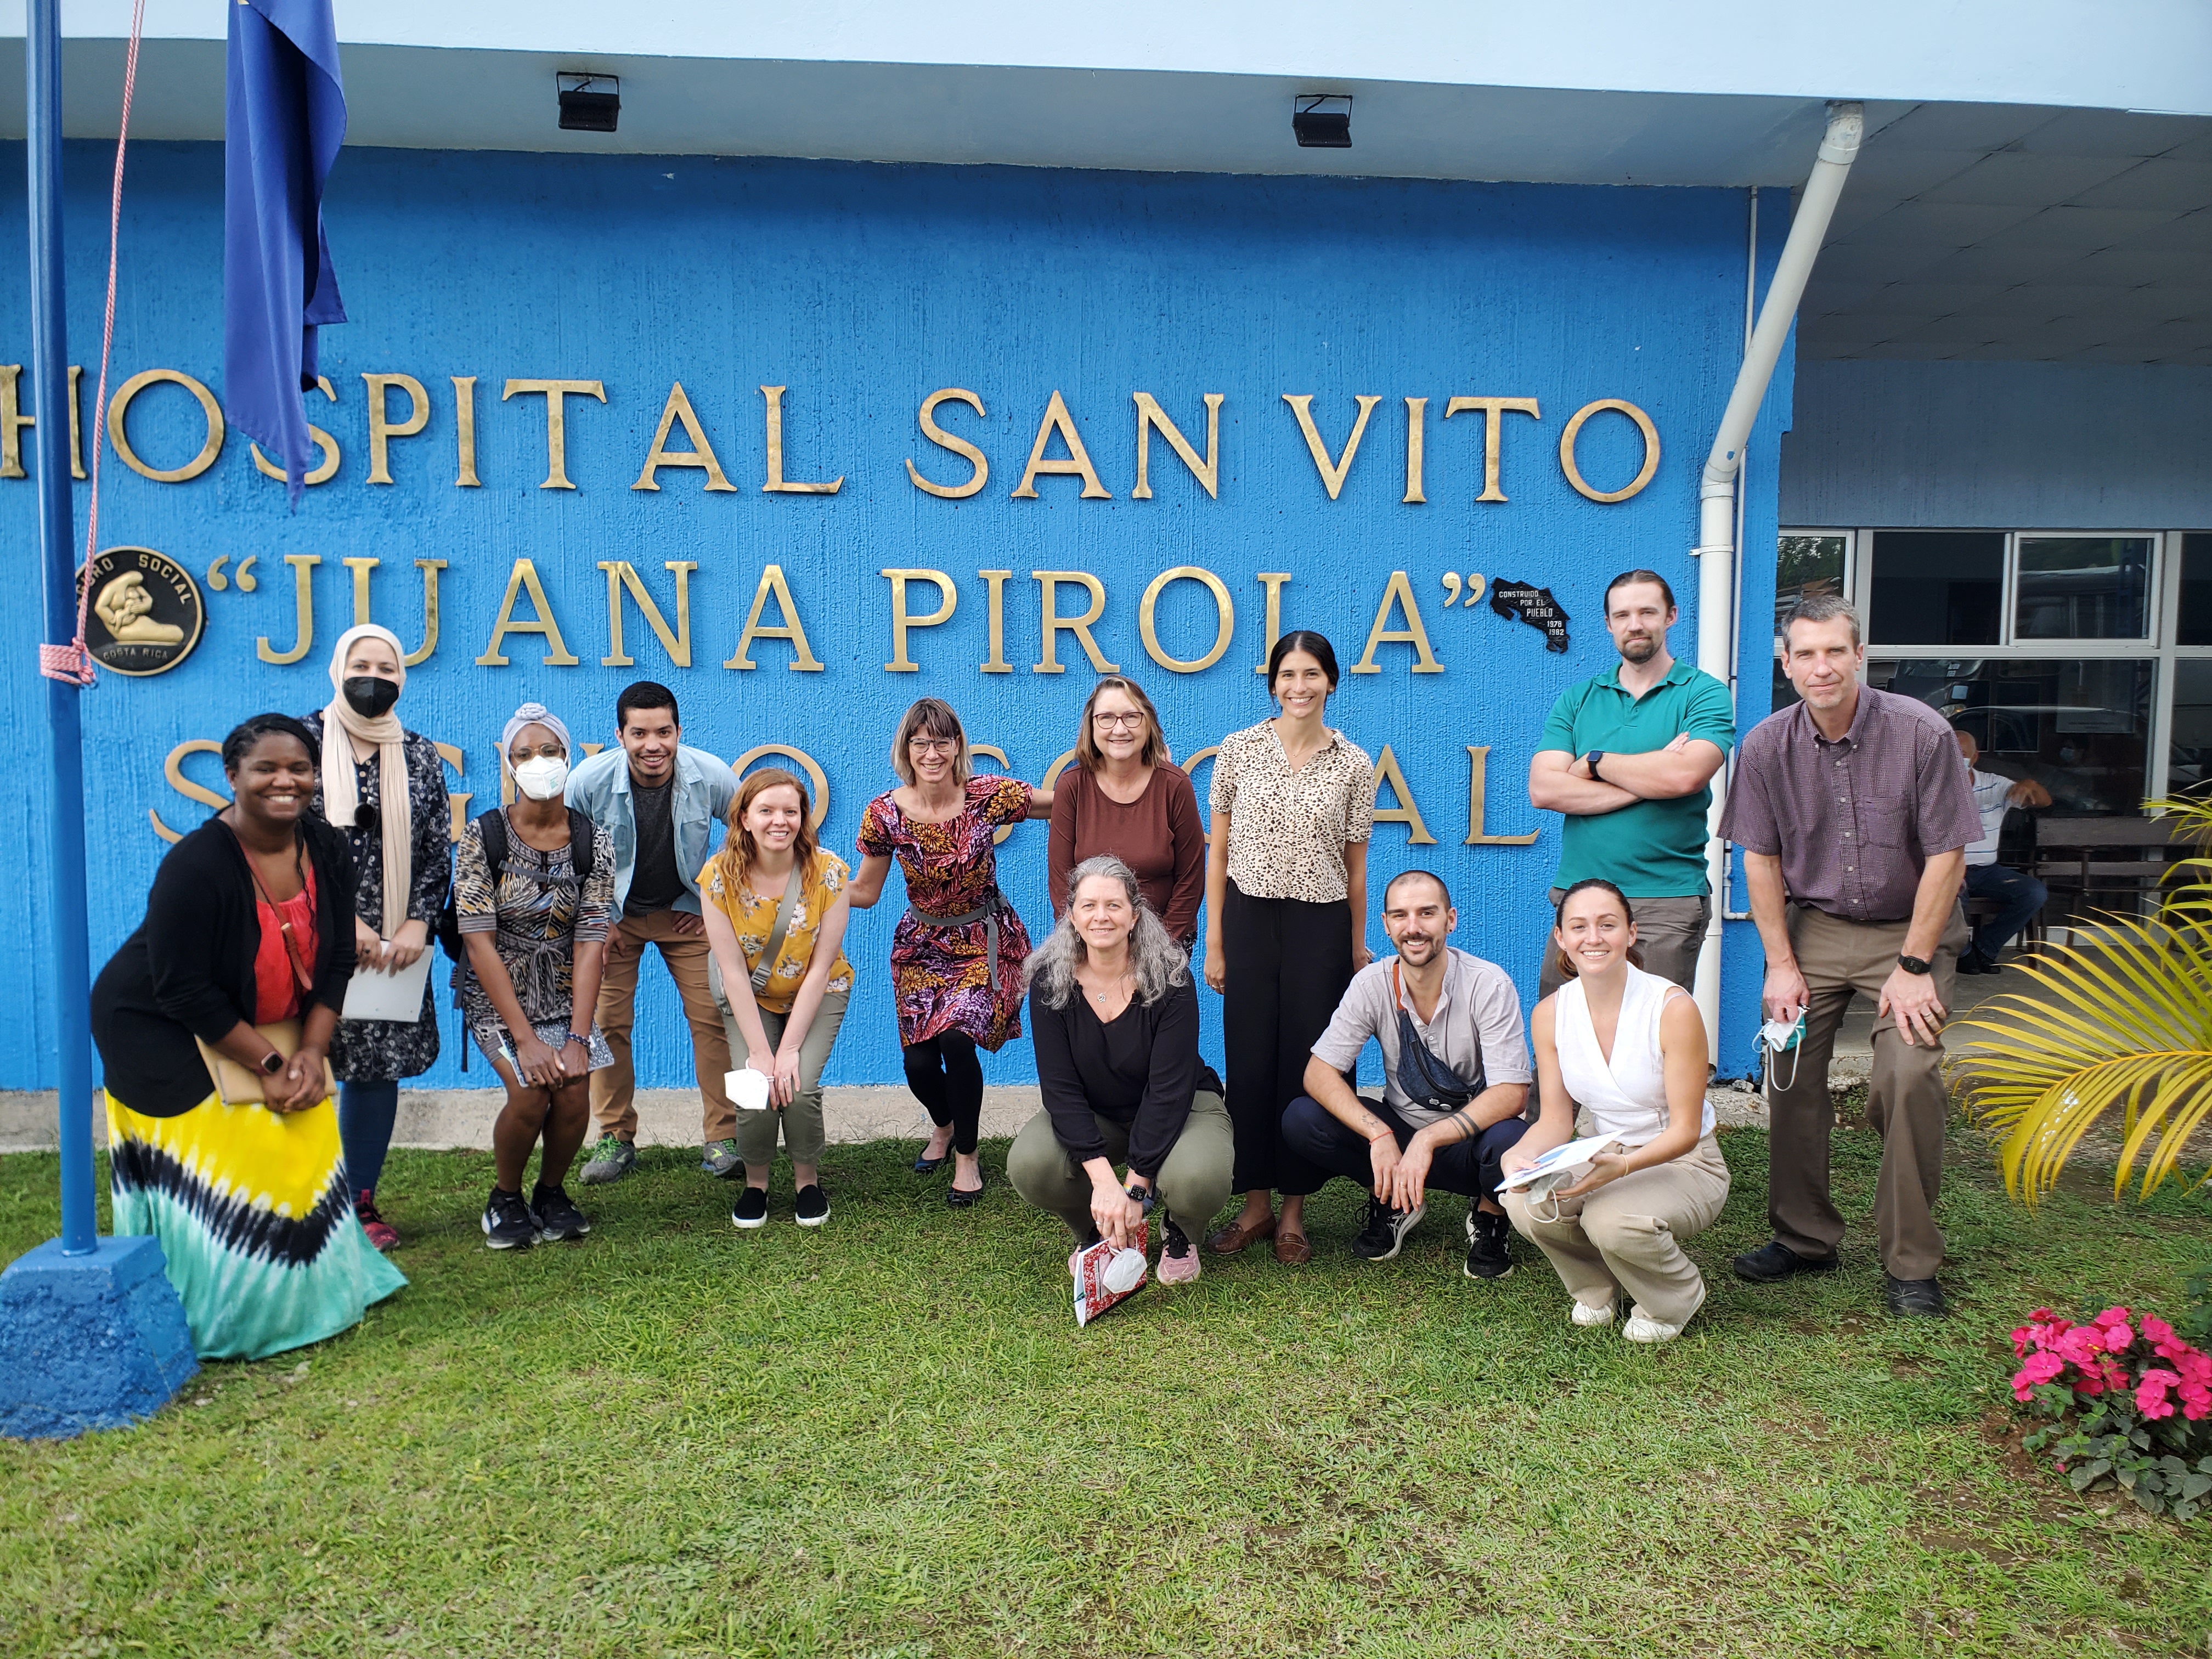 A group of people pose for a photo outside a hospital in Costa Rica.